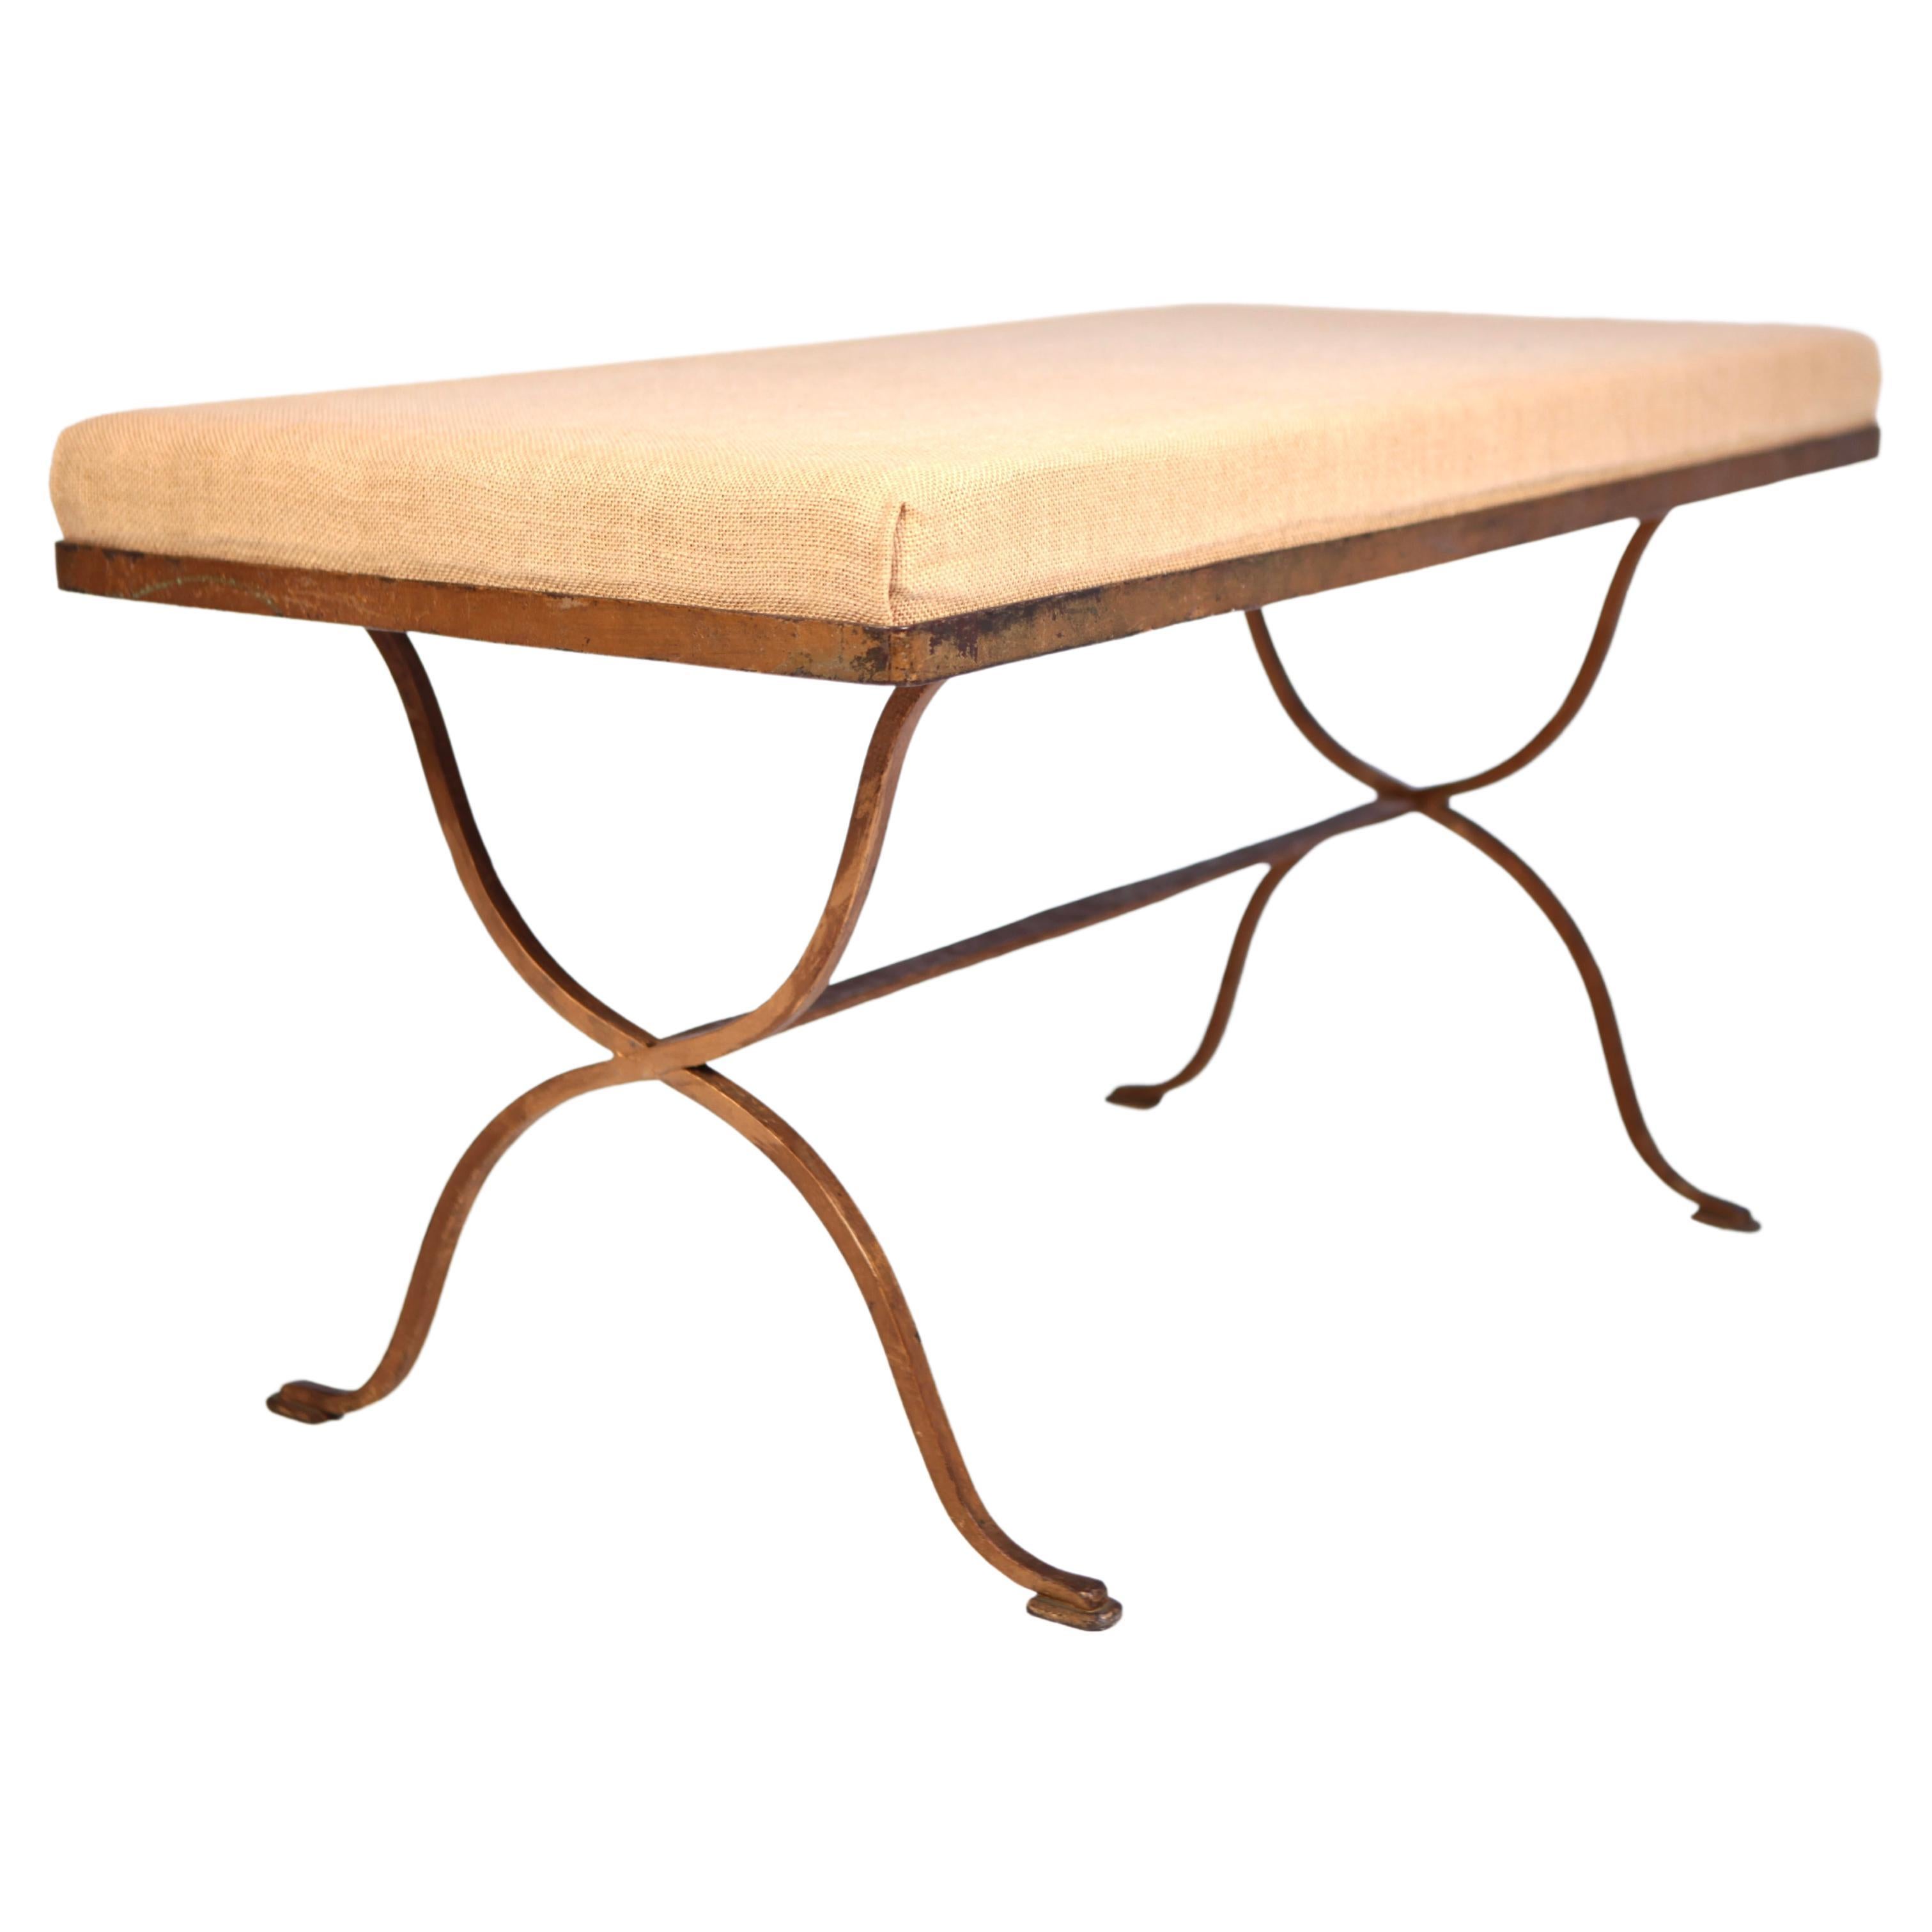 Spanish Gilded Iron Bench or Coffee-Table, 1950s